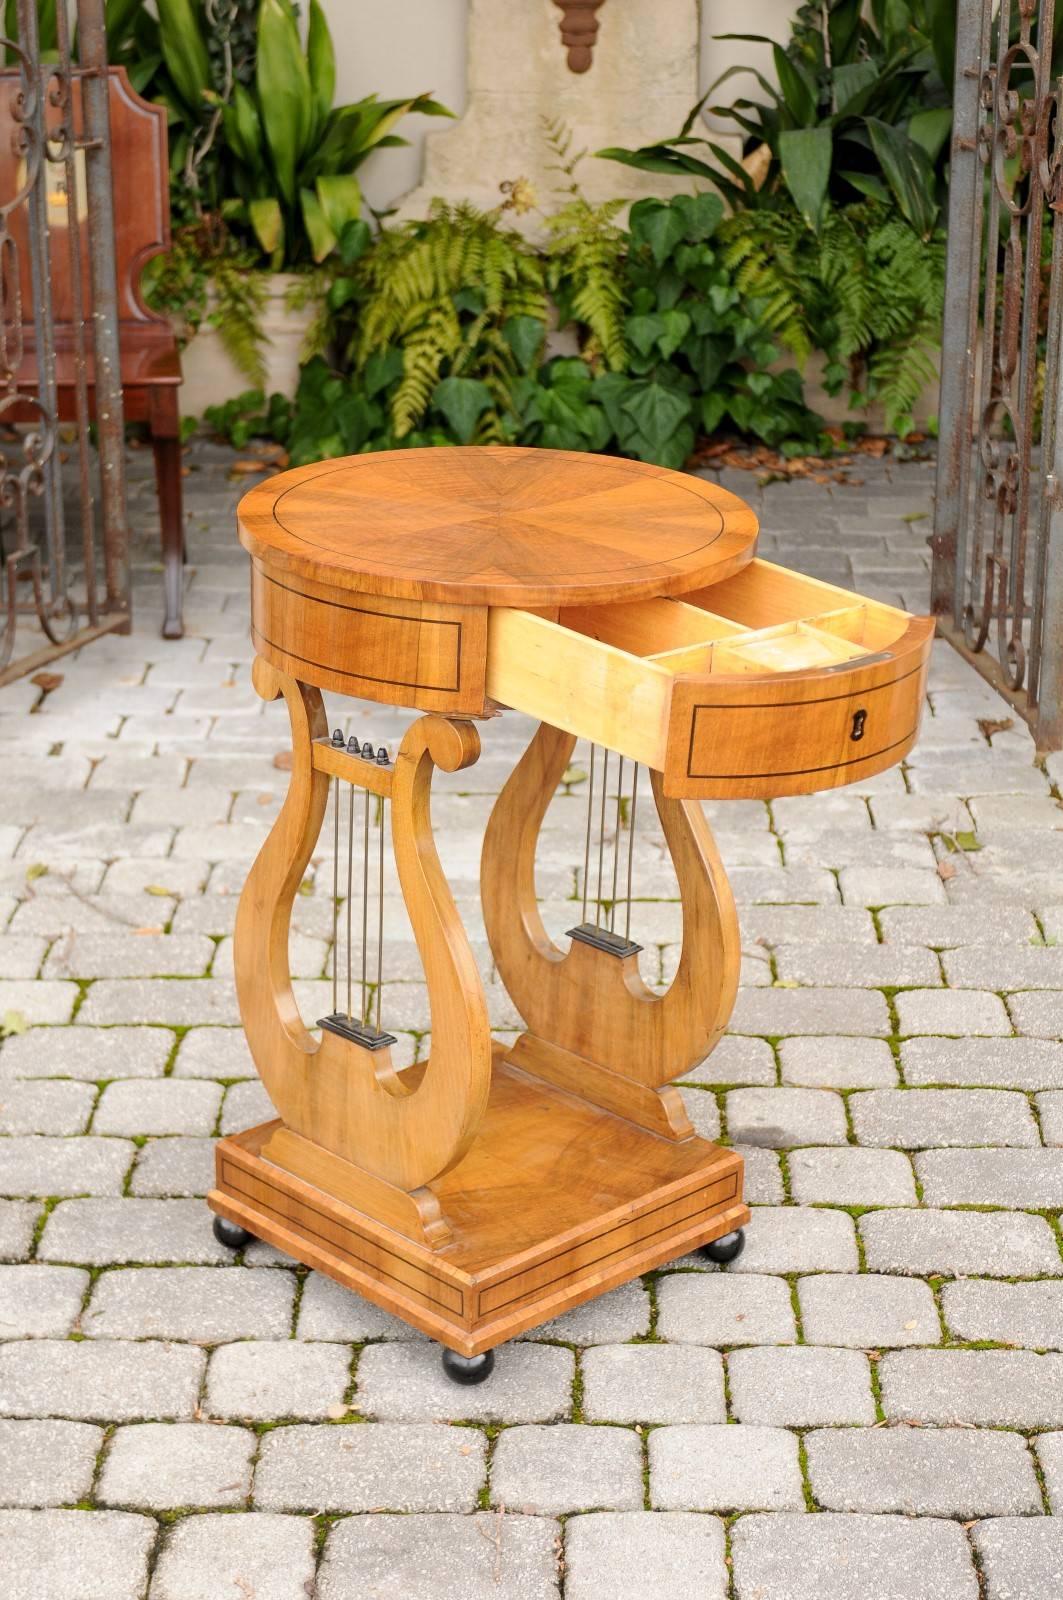 An Austrian Biedermeier period  table with lyre shaped legs and round top from the mid-19th century. This Biedermeier table circa 1840 features a circular top adorned with radiating veneer, surrounded by a dark banded inlay. The apron is decorated